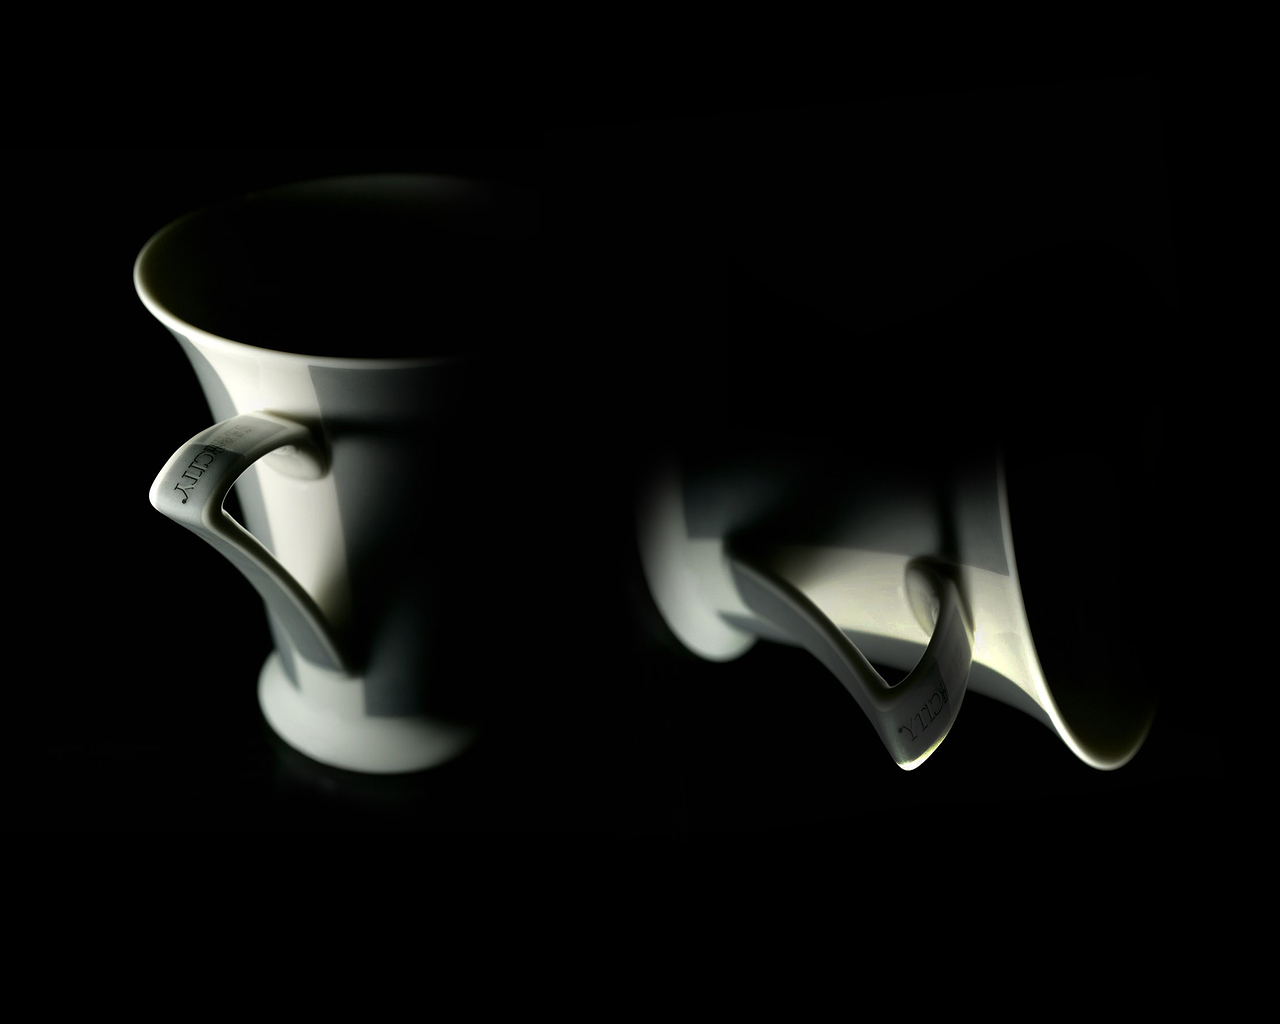 a couple of cups sitting on top of a table, inspired by Robert Mapplethorpe, flickr, precisionism, contrast side light, rosenthal, backlight photo sample, detailed product photo